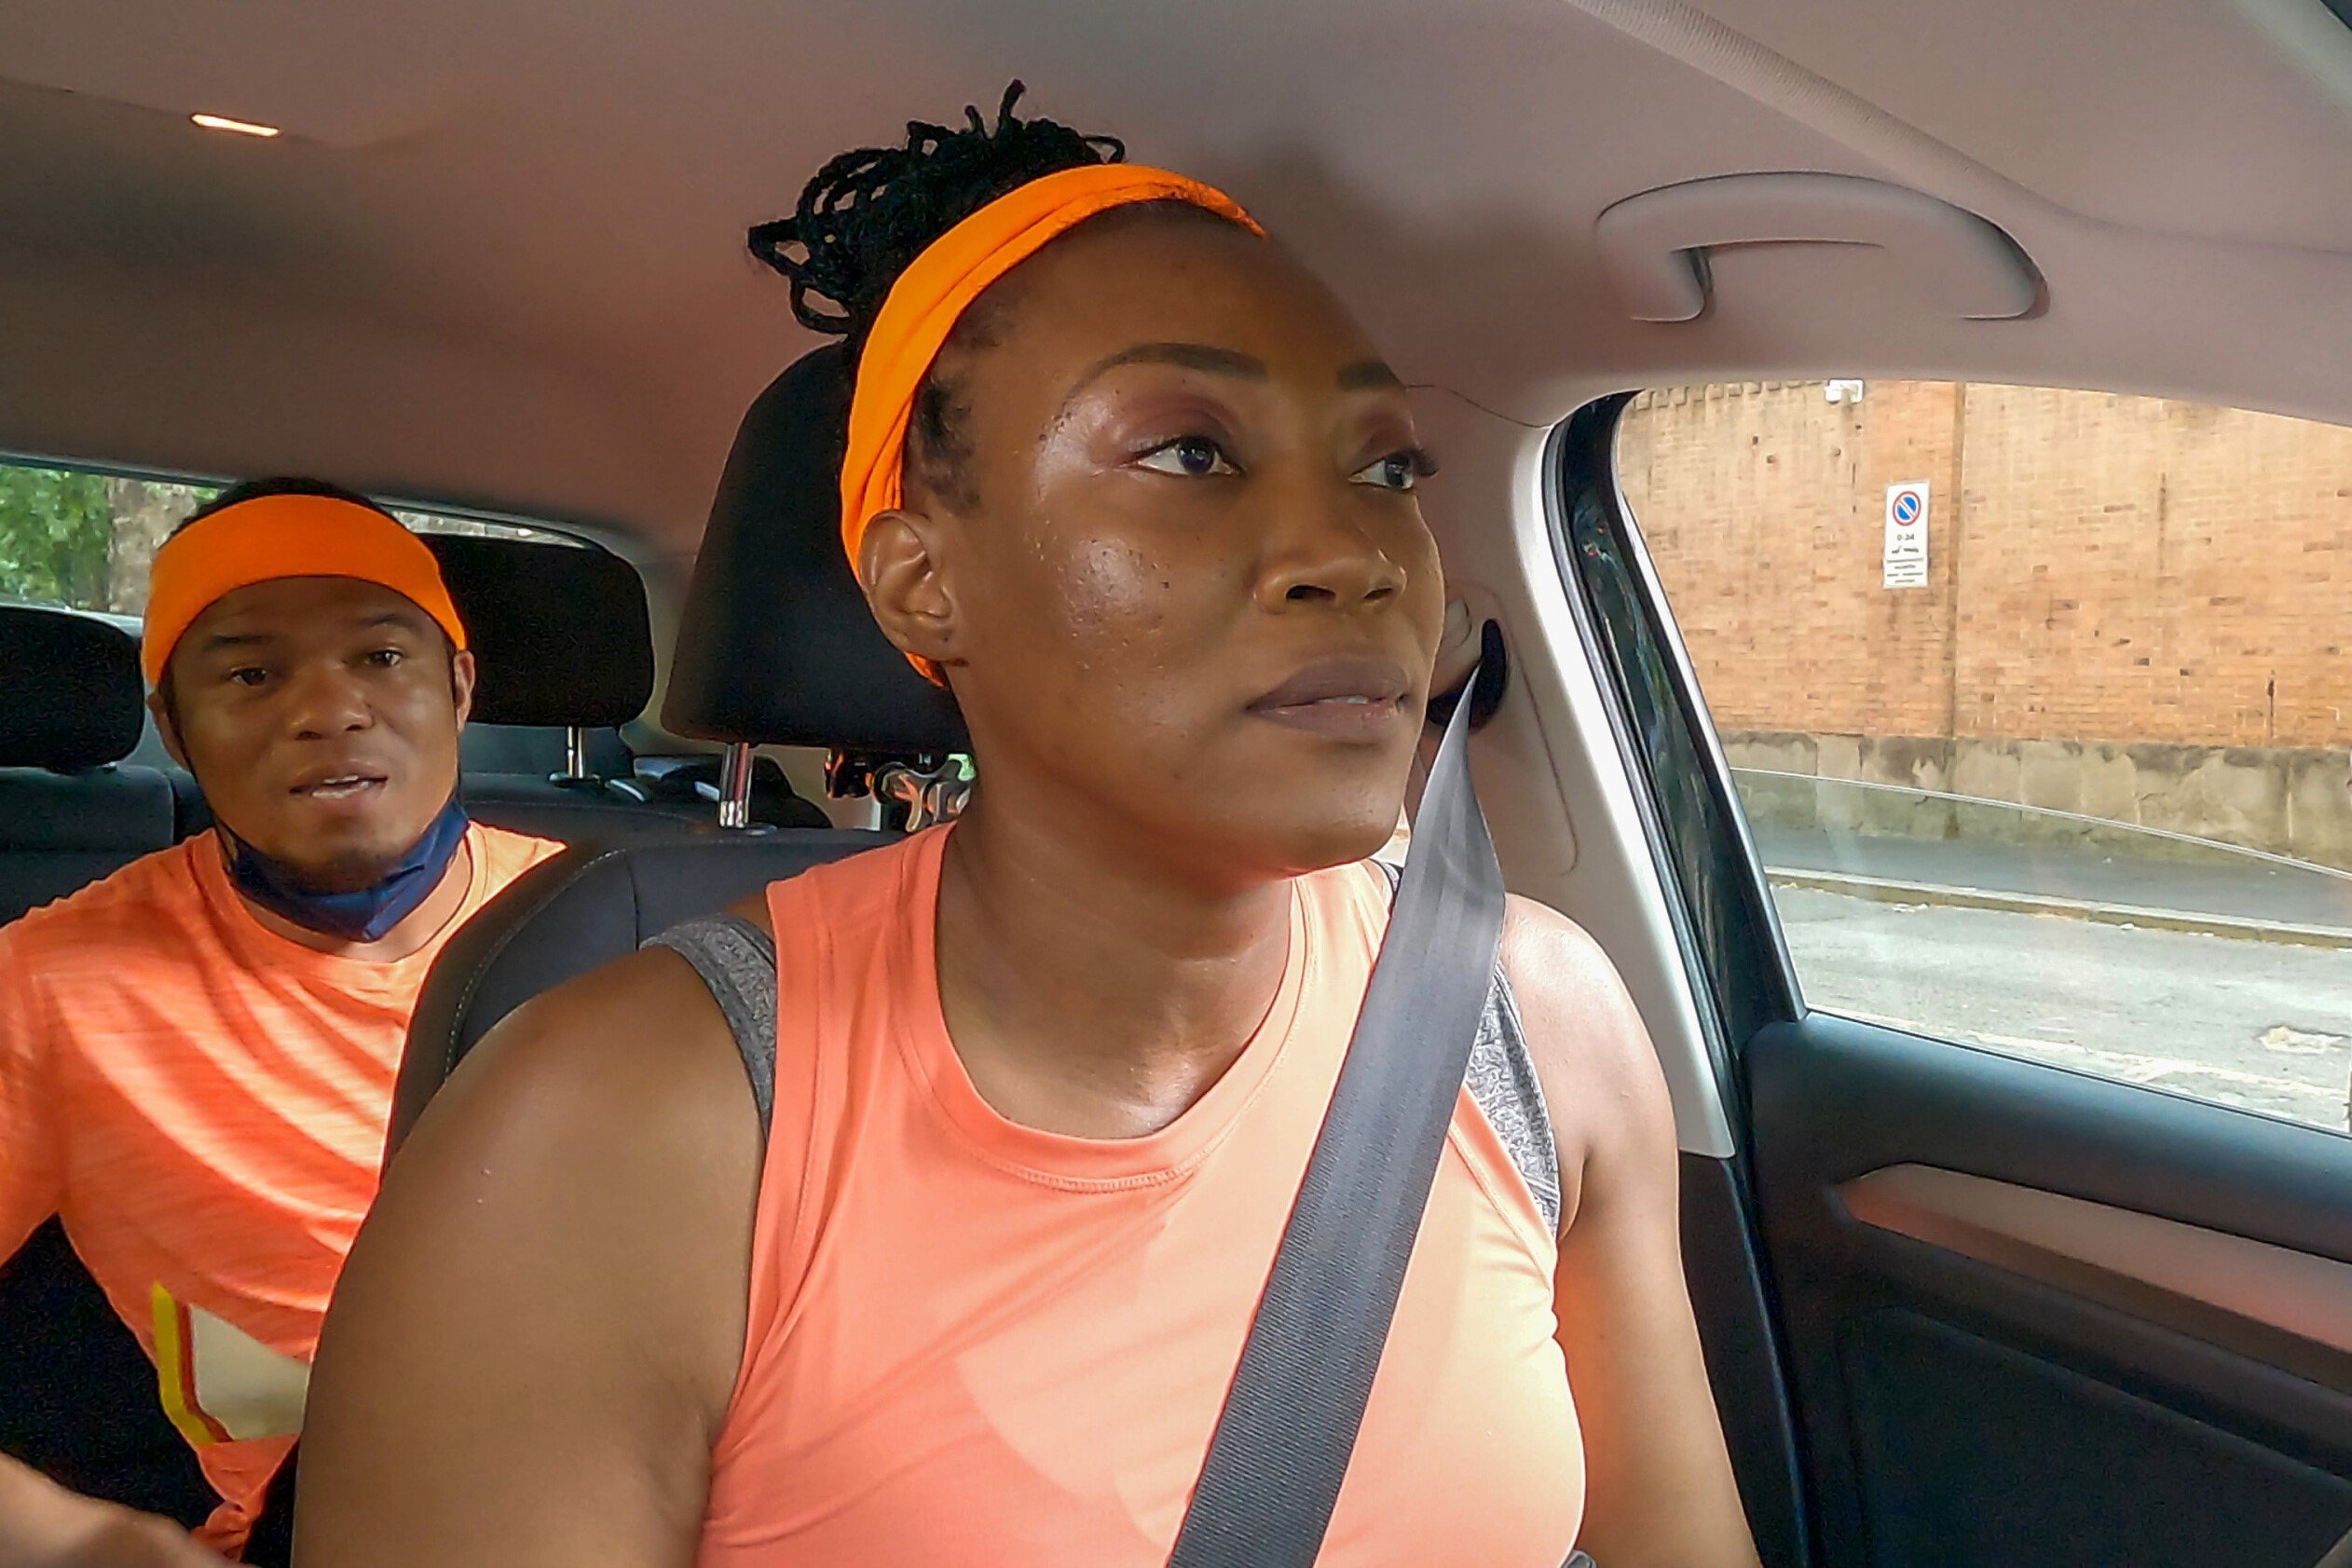 Lumumba Roberts and Glenda Roberts, one of the teams in 'The Amazing Race' Season 34, drive in a car, with Lumumba in the backseat and Glenda in the driver's seat.